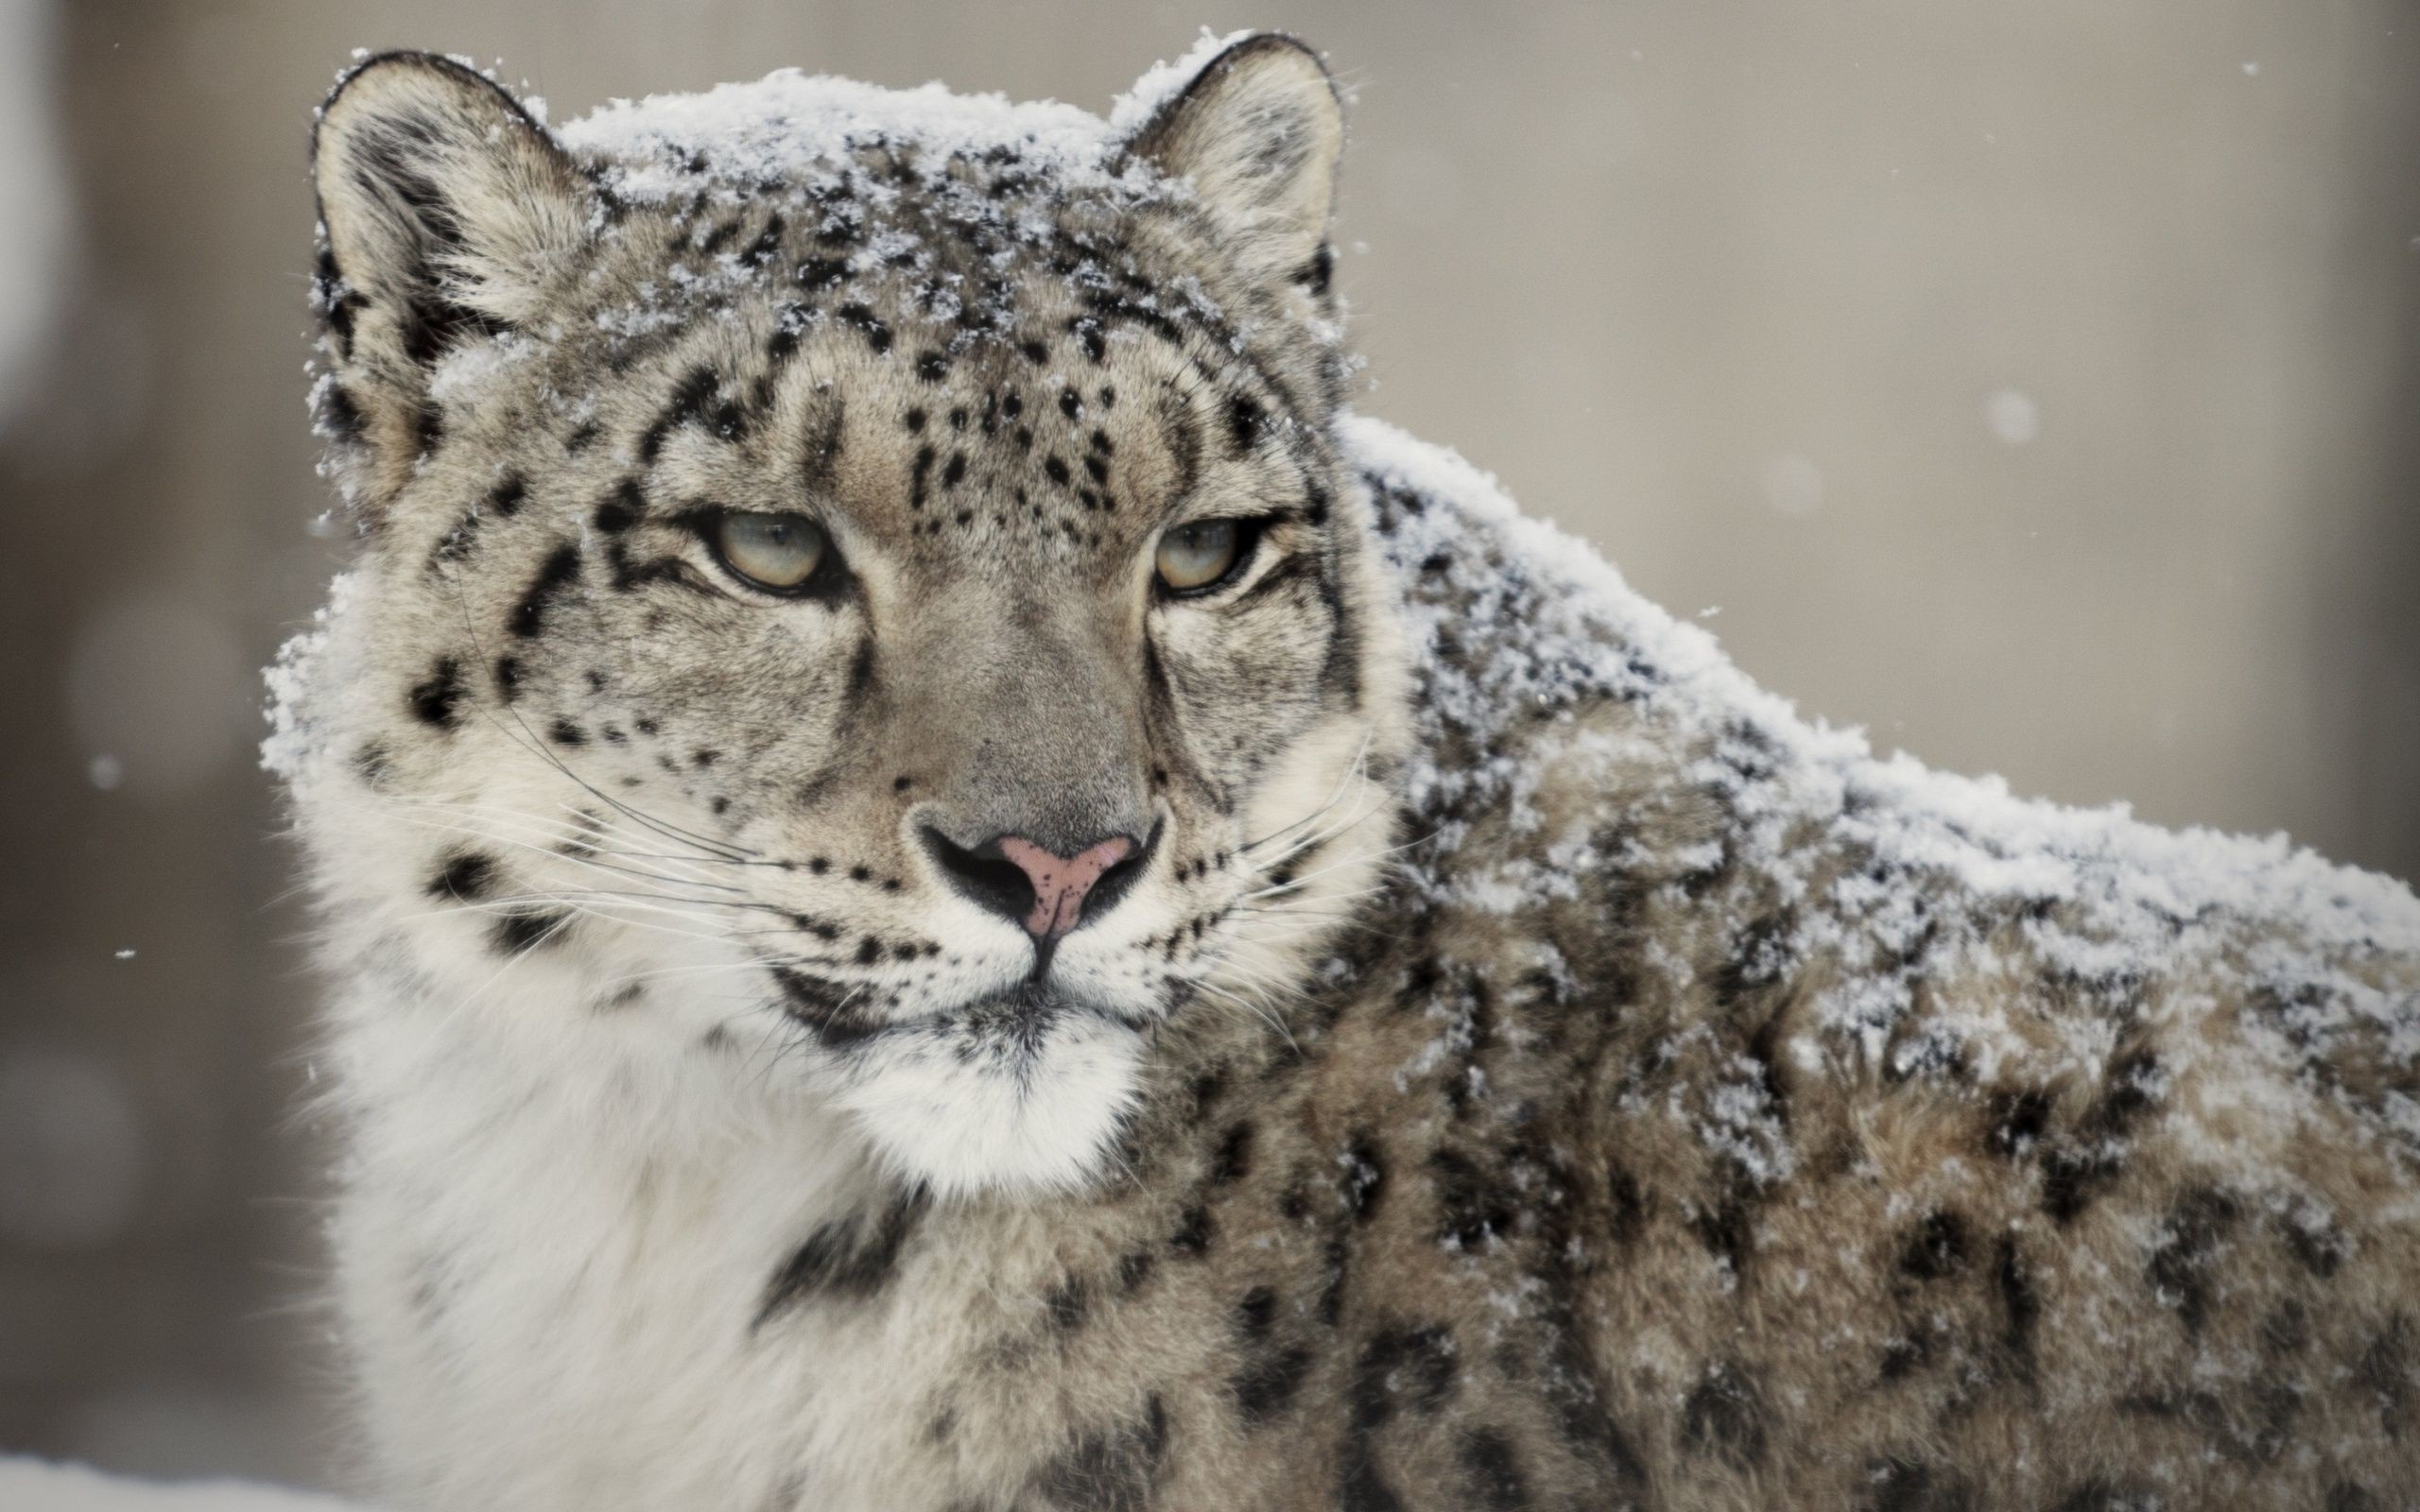 check odbc manager mac snow leopard